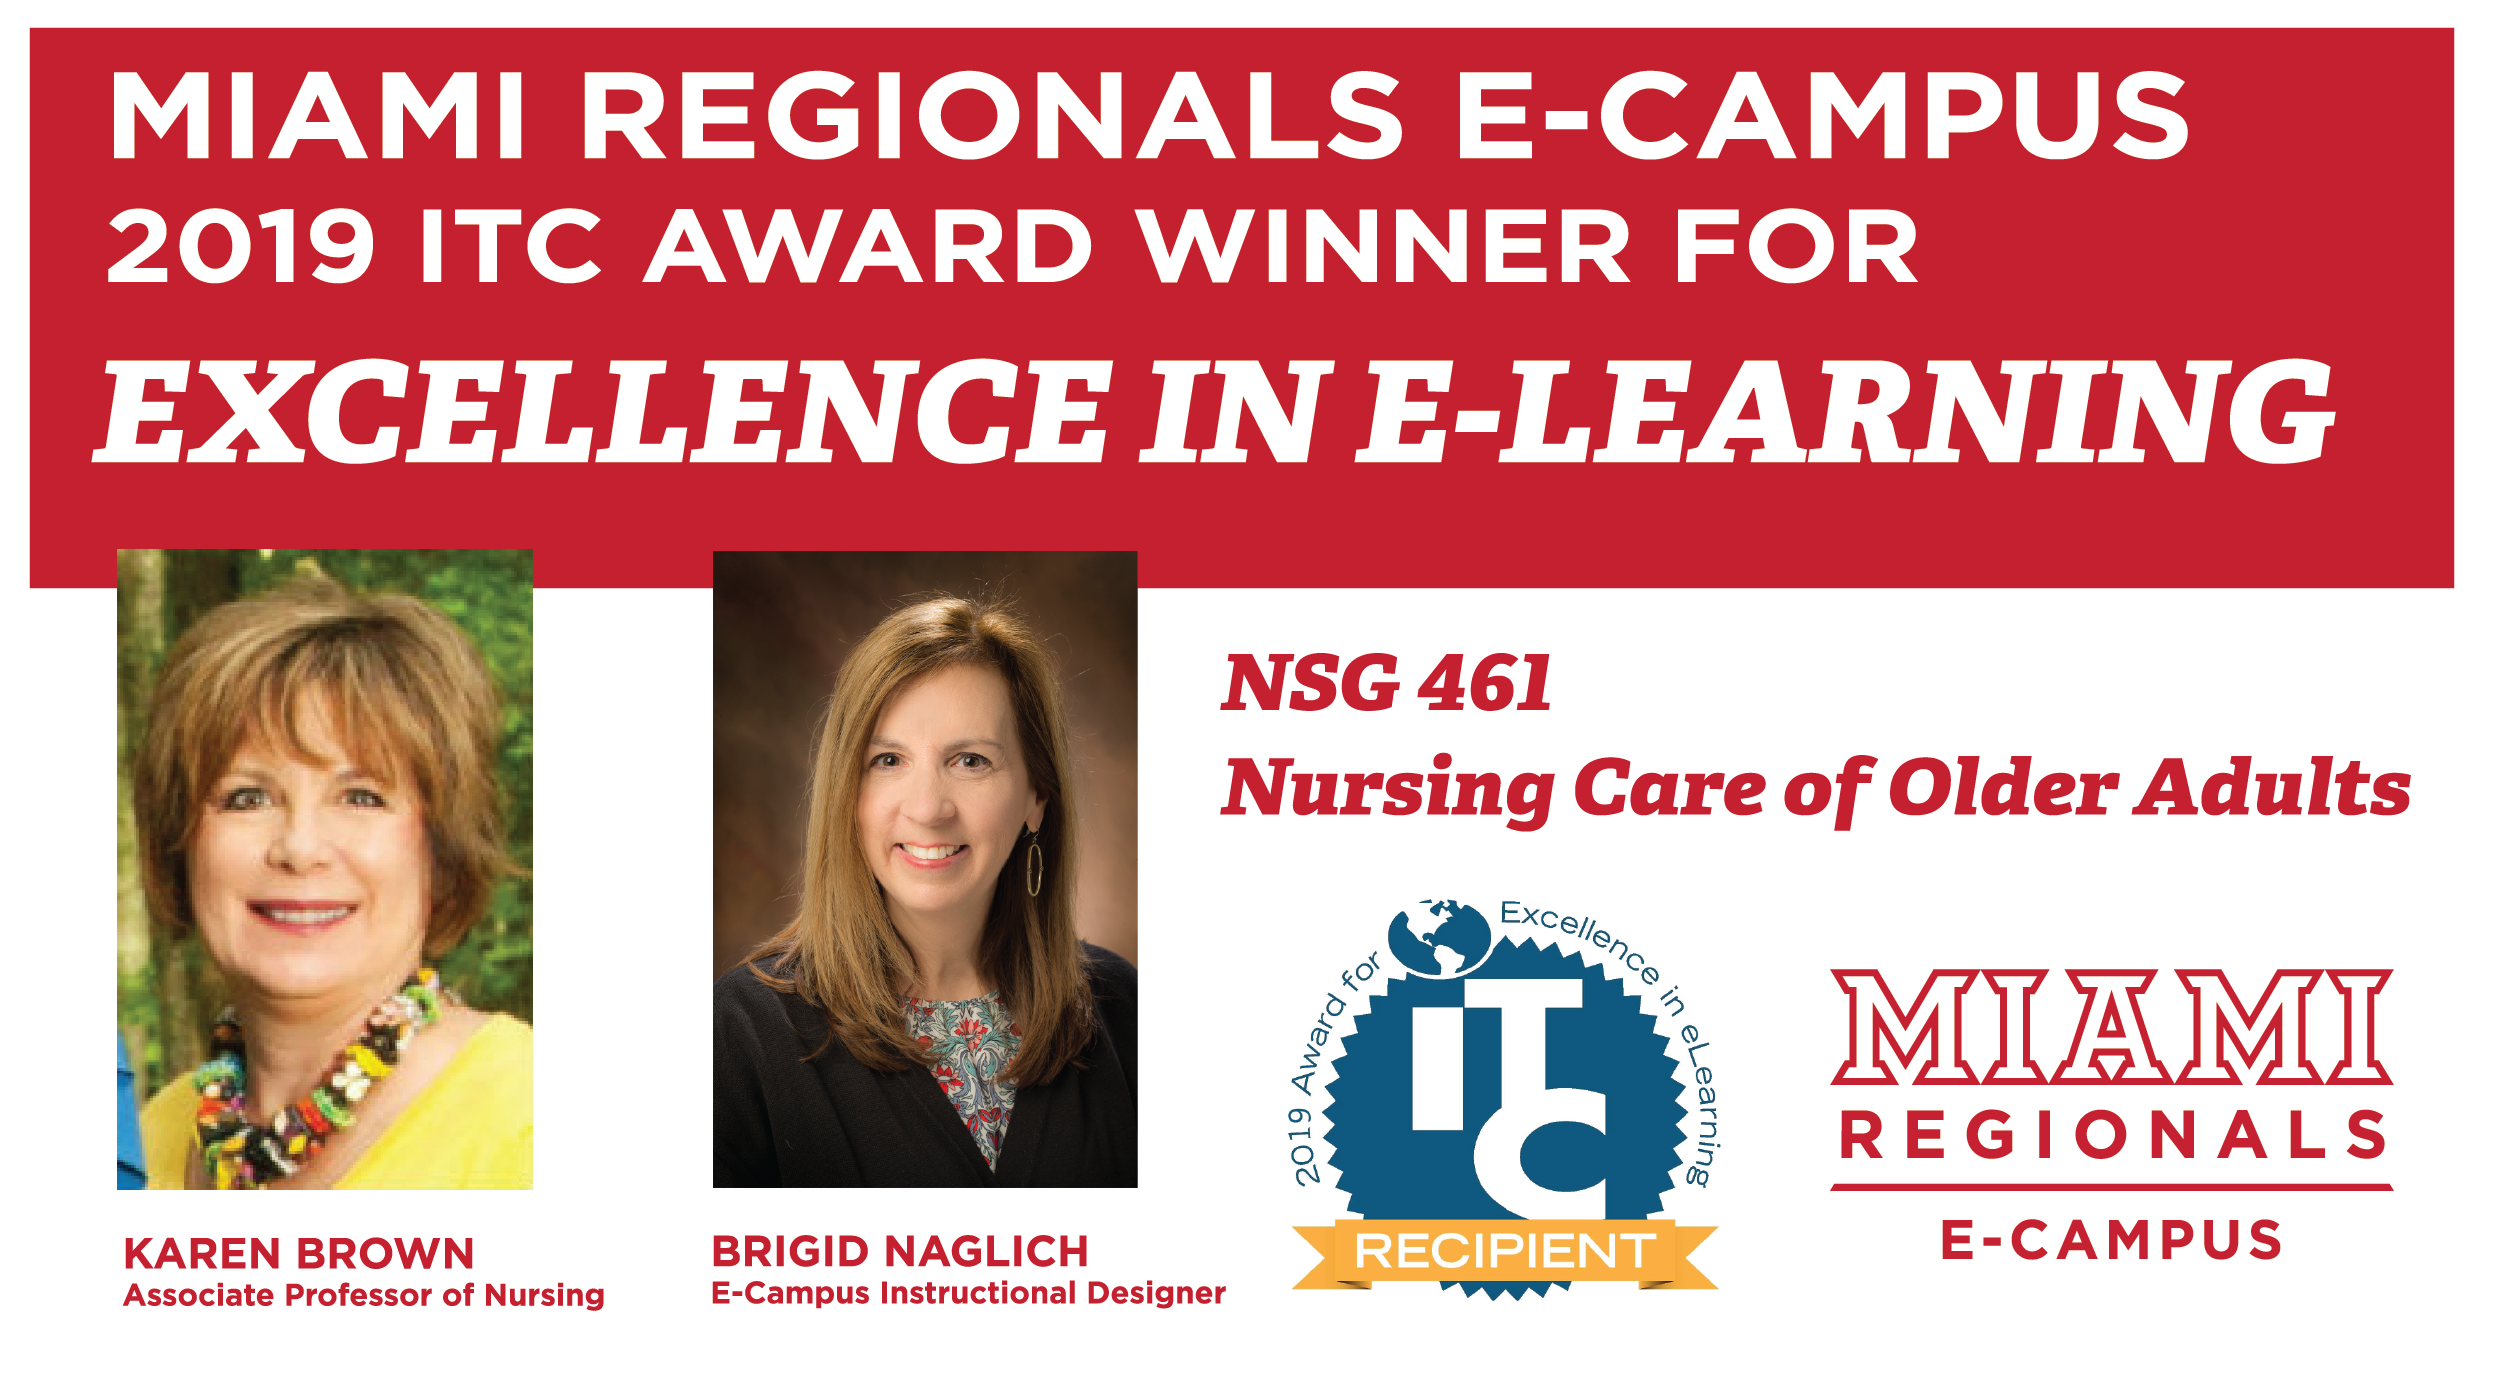 Photo of Karen Brown, Associate Professor of Nursing & Brigid Naglich, E-Campus Instructional Designer, recipients of the 2019 ITC Award for Excellence in E-Learning for NSG 461 Nursing Care of Older Adults